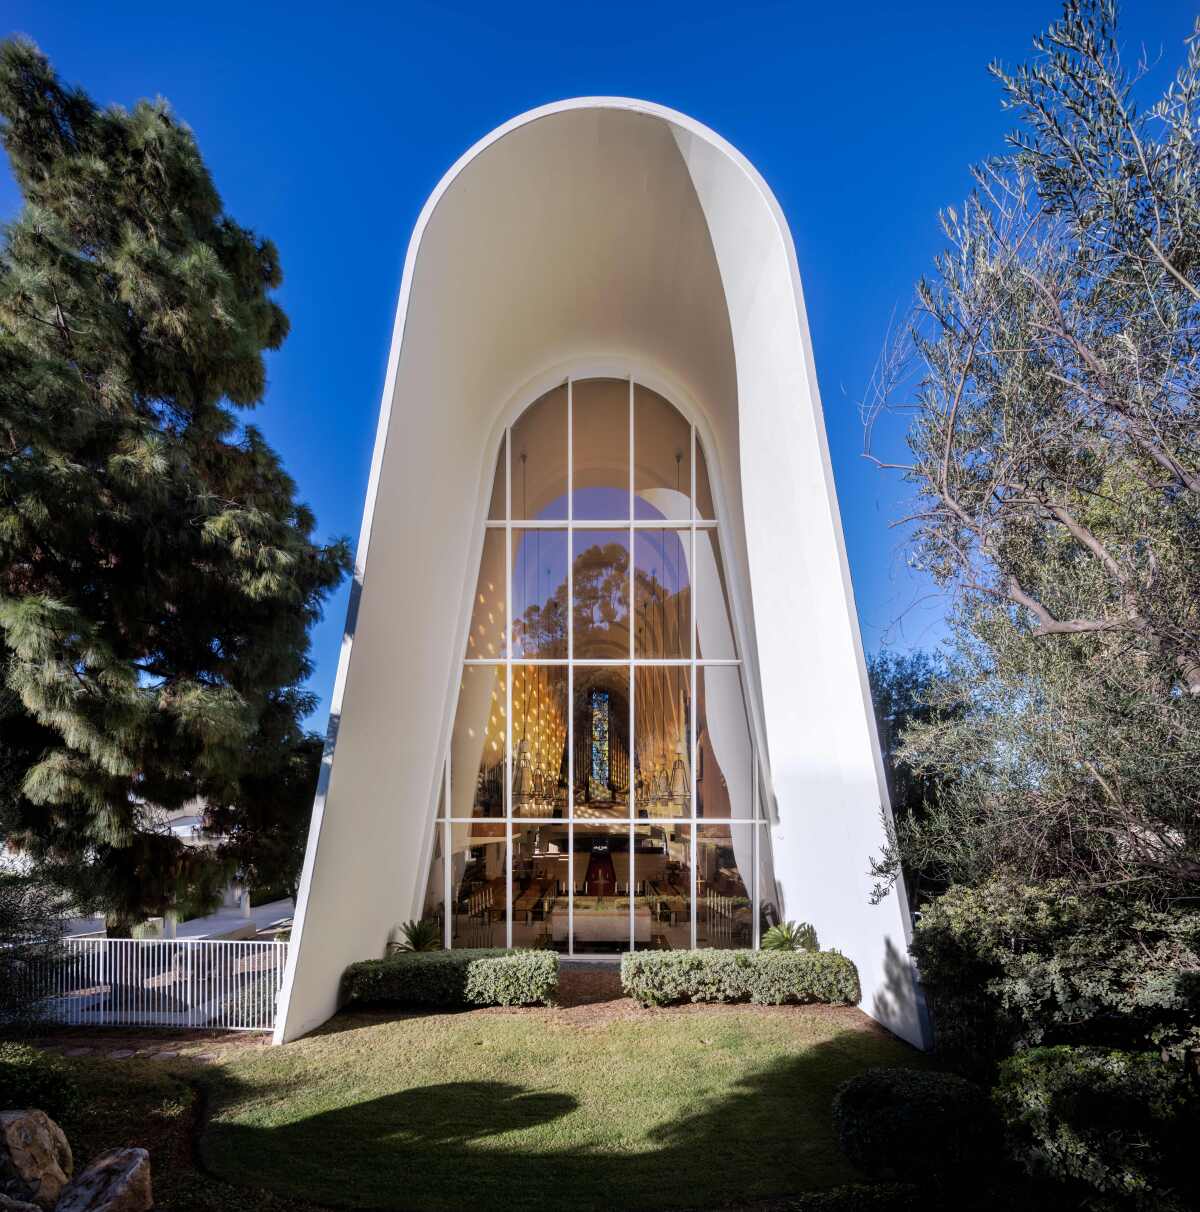 First United Methodist Church in Mission Valley is one of the sites featured in “Sacred Architecture of San Diego/Tijuana.”